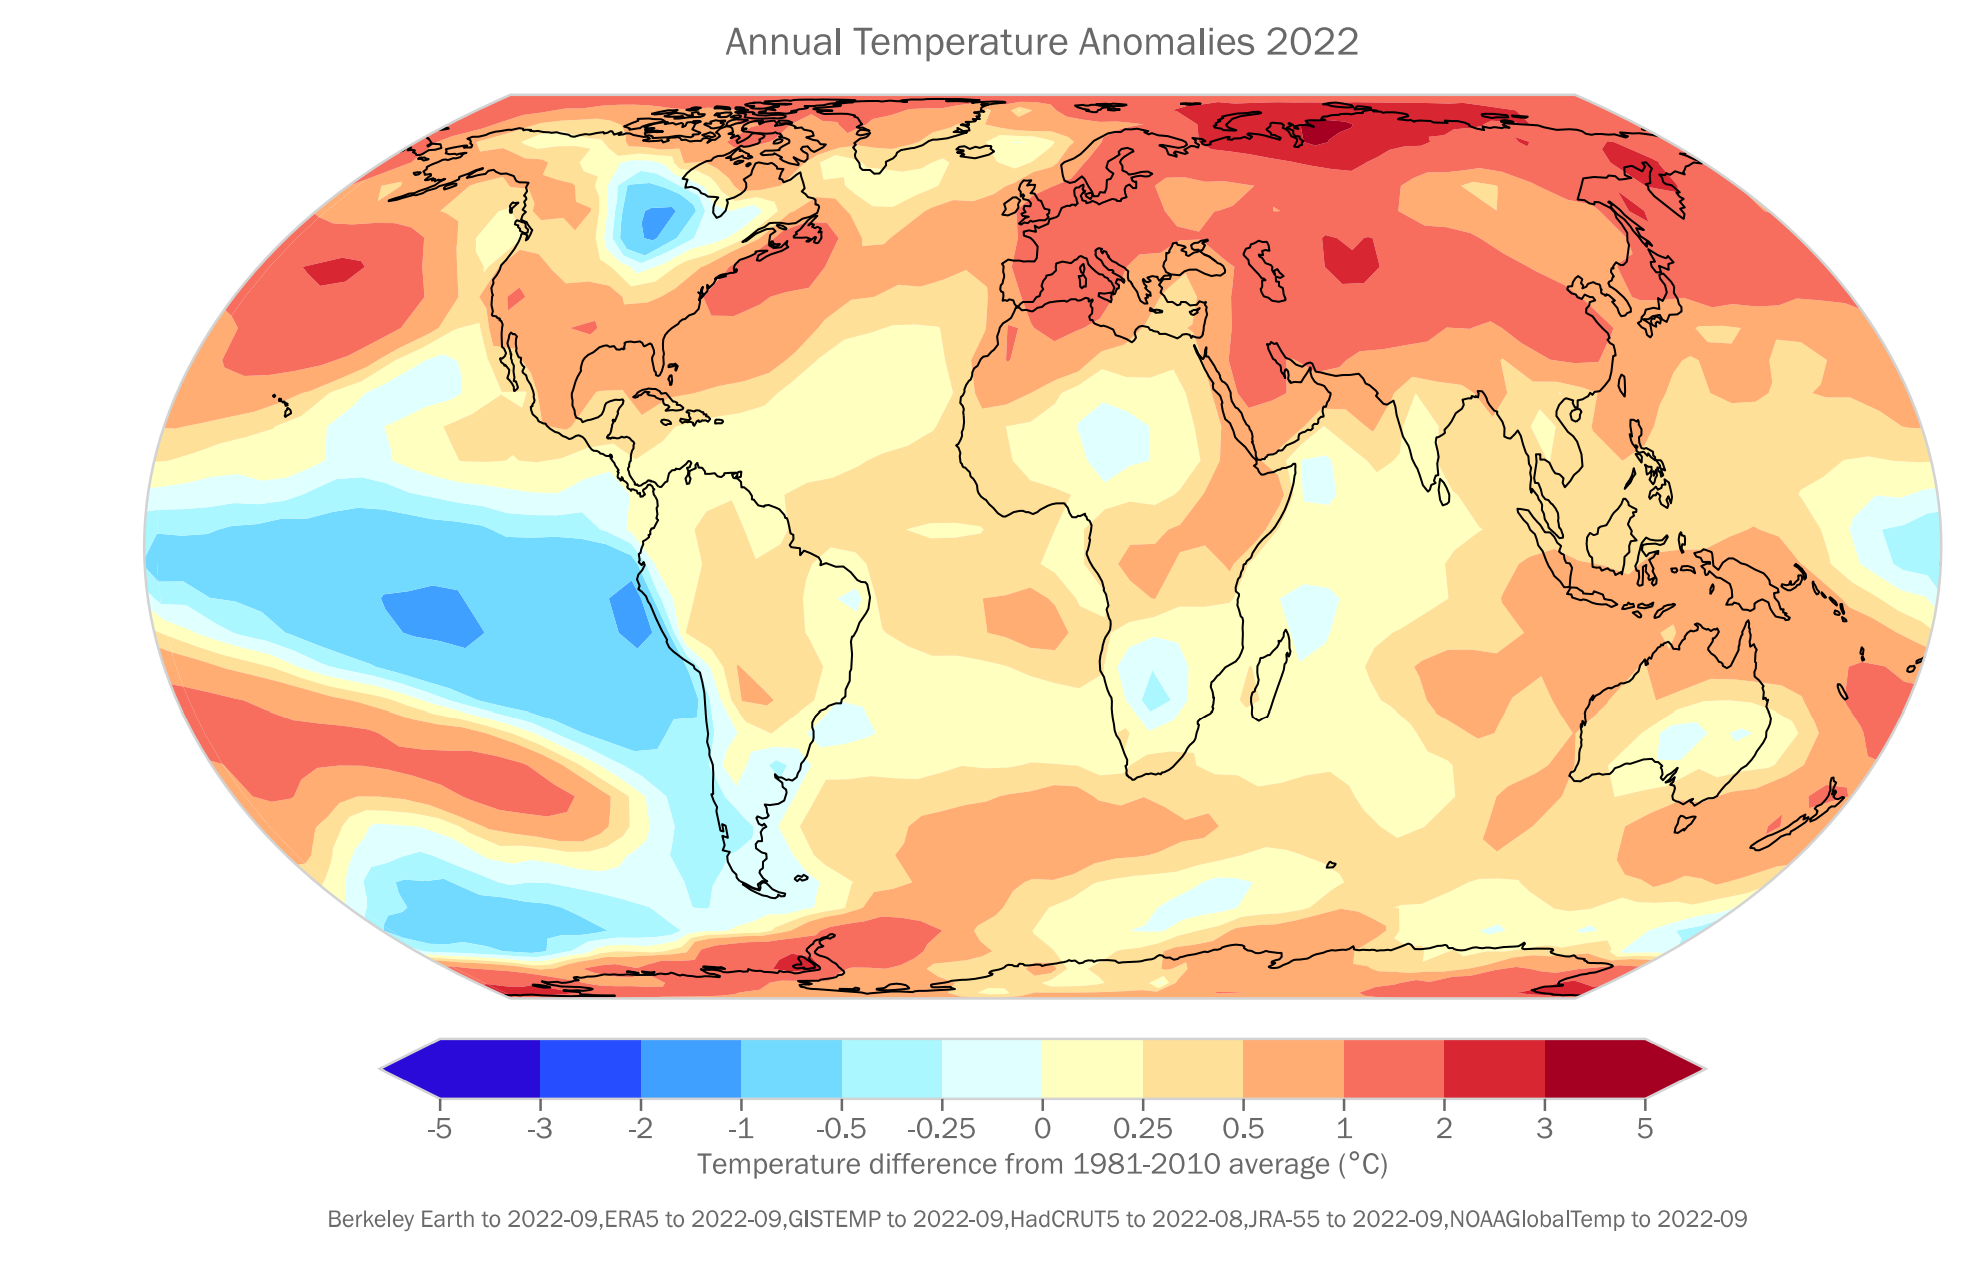 Near-surface temperature differences relative to the 1981–2010 average for 2022 to September. The map shows the median anomaly calculated from six data sets: HadCRUT5, ERA5, JRA-55, GISTEMP, NOAAGlobalTemp, and Berkeley Earth. Graphic: WMO